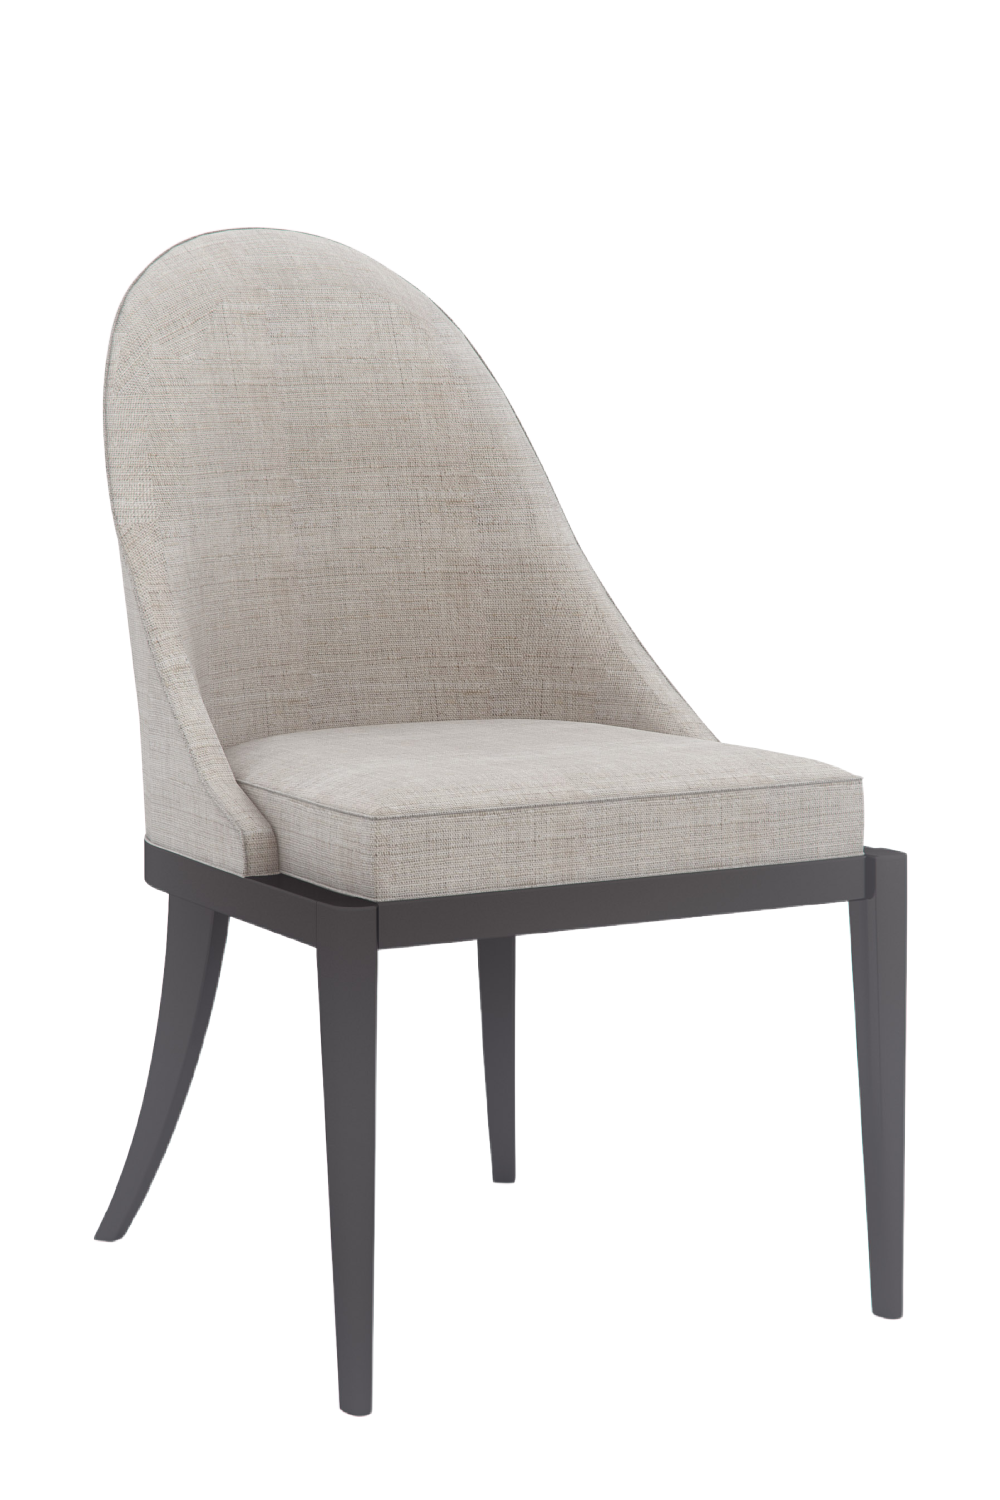 Beige Curved Side Chair | Caracole Natural Choice | Oroa.com